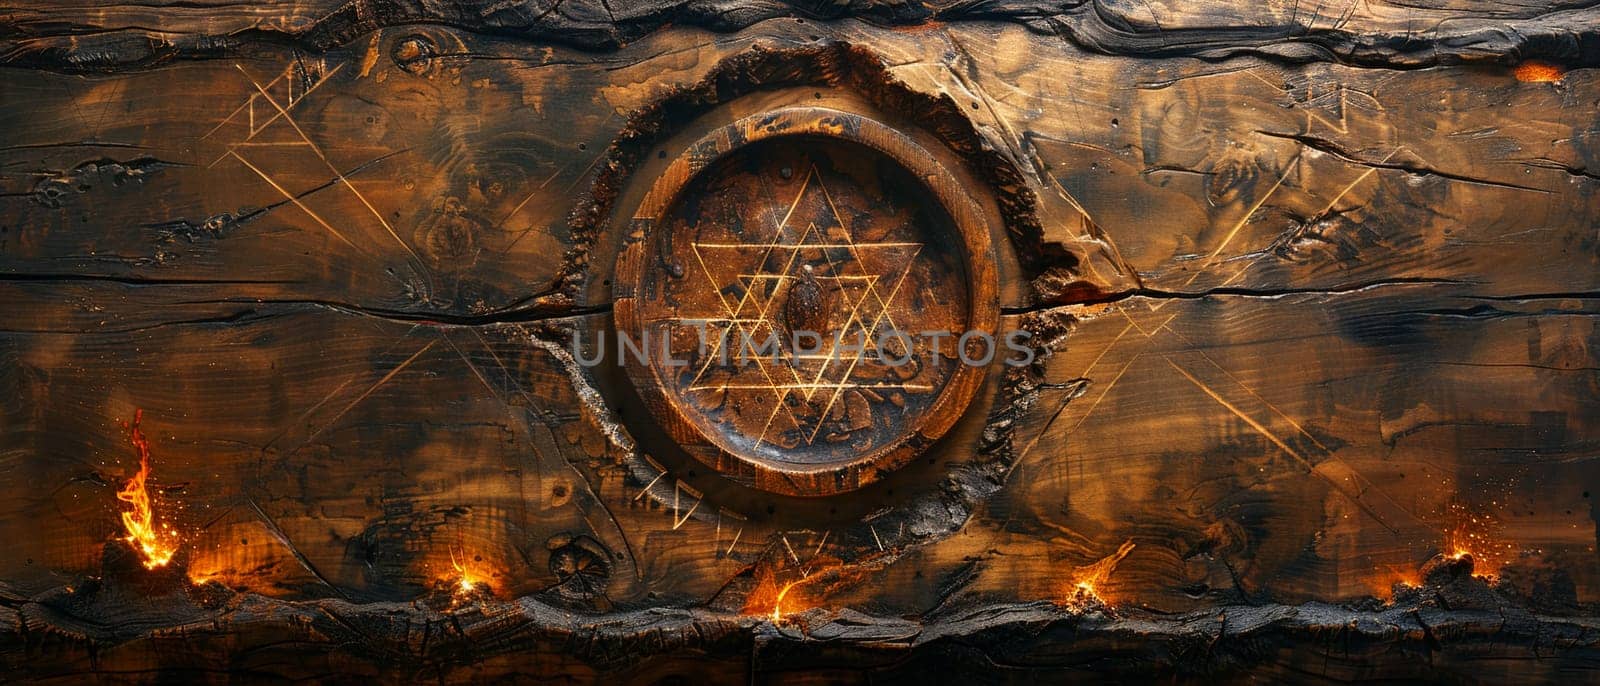 Kabbalistic Tree of Life Symbol Etched into Wood, The mystical diagram blurs into the material, a map of divine emanation and pathworking.